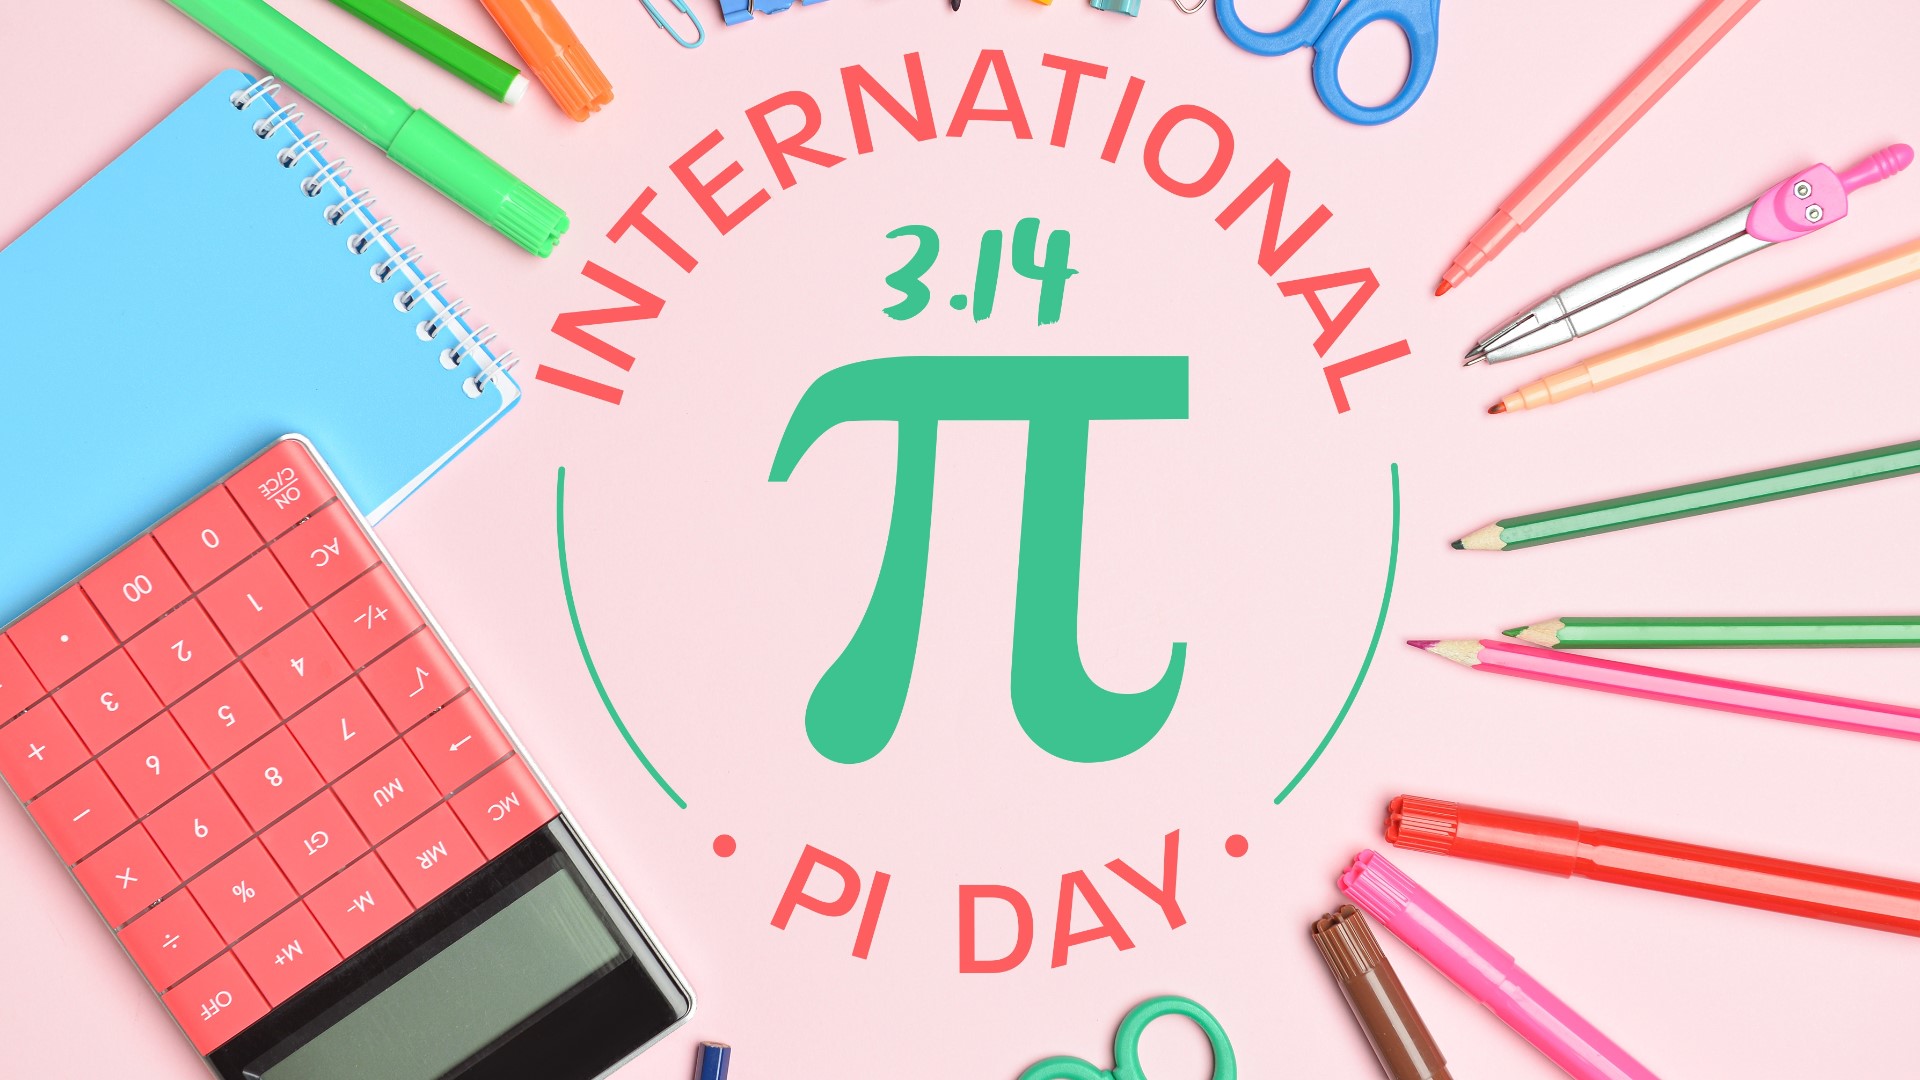 Sponsored by Consumer Product Newsgroup. David Gregg, Executive Editor of CPNewsgroup.com shares how Photomath celebrates 'Pi Day' and their math phobia “cure!”